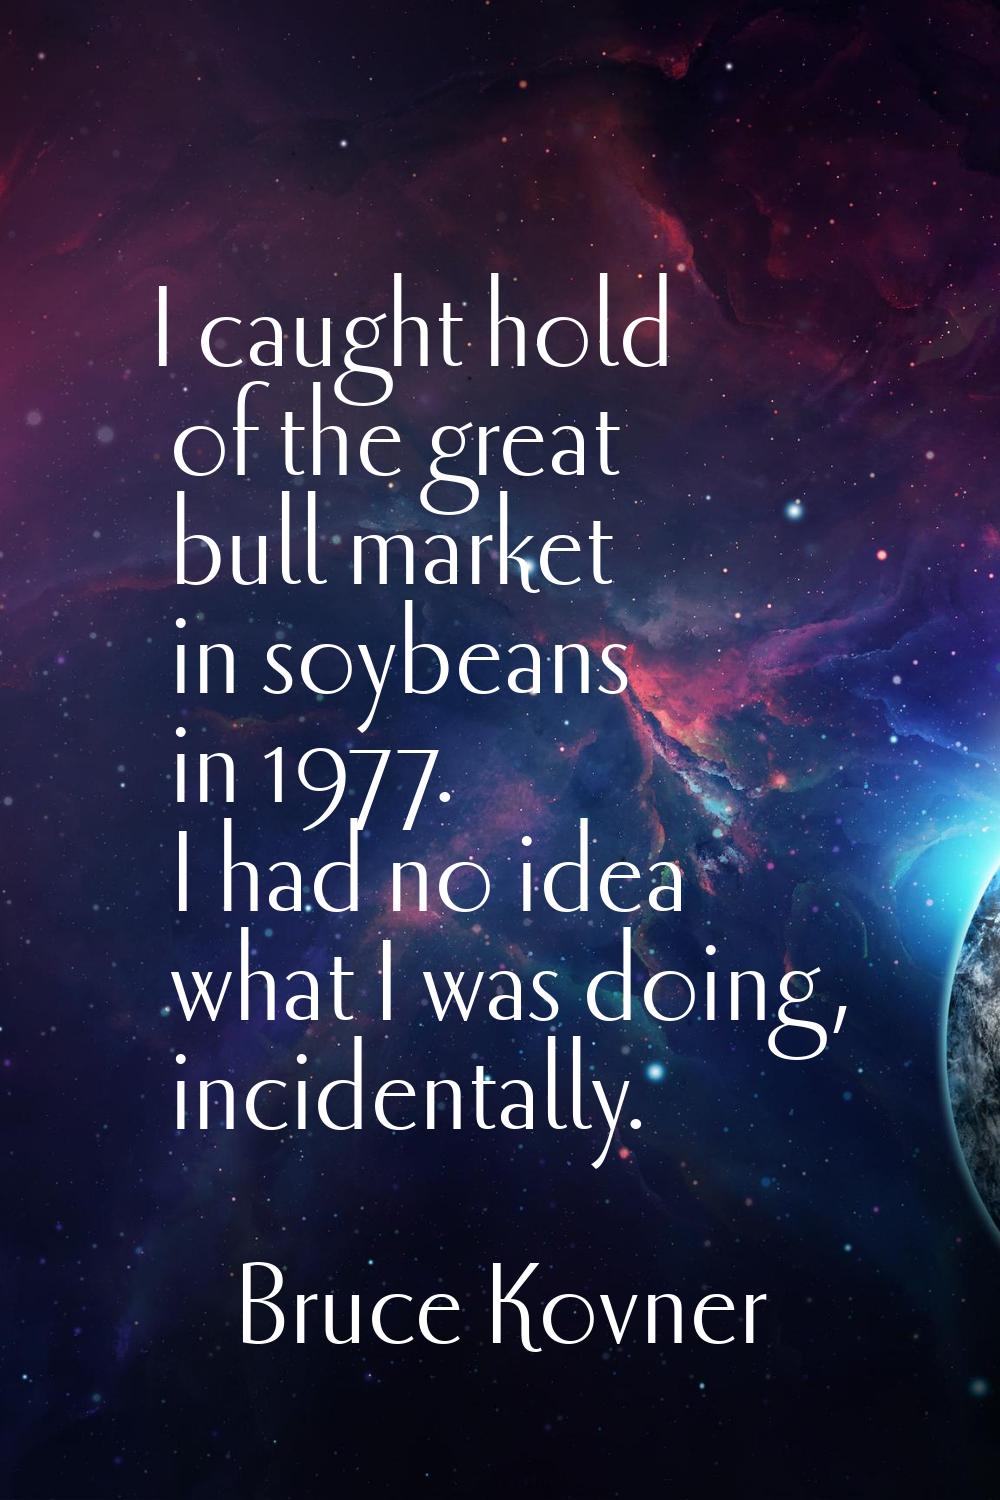 I caught hold of the great bull market in soybeans in 1977. I had no idea what I was doing, inciden